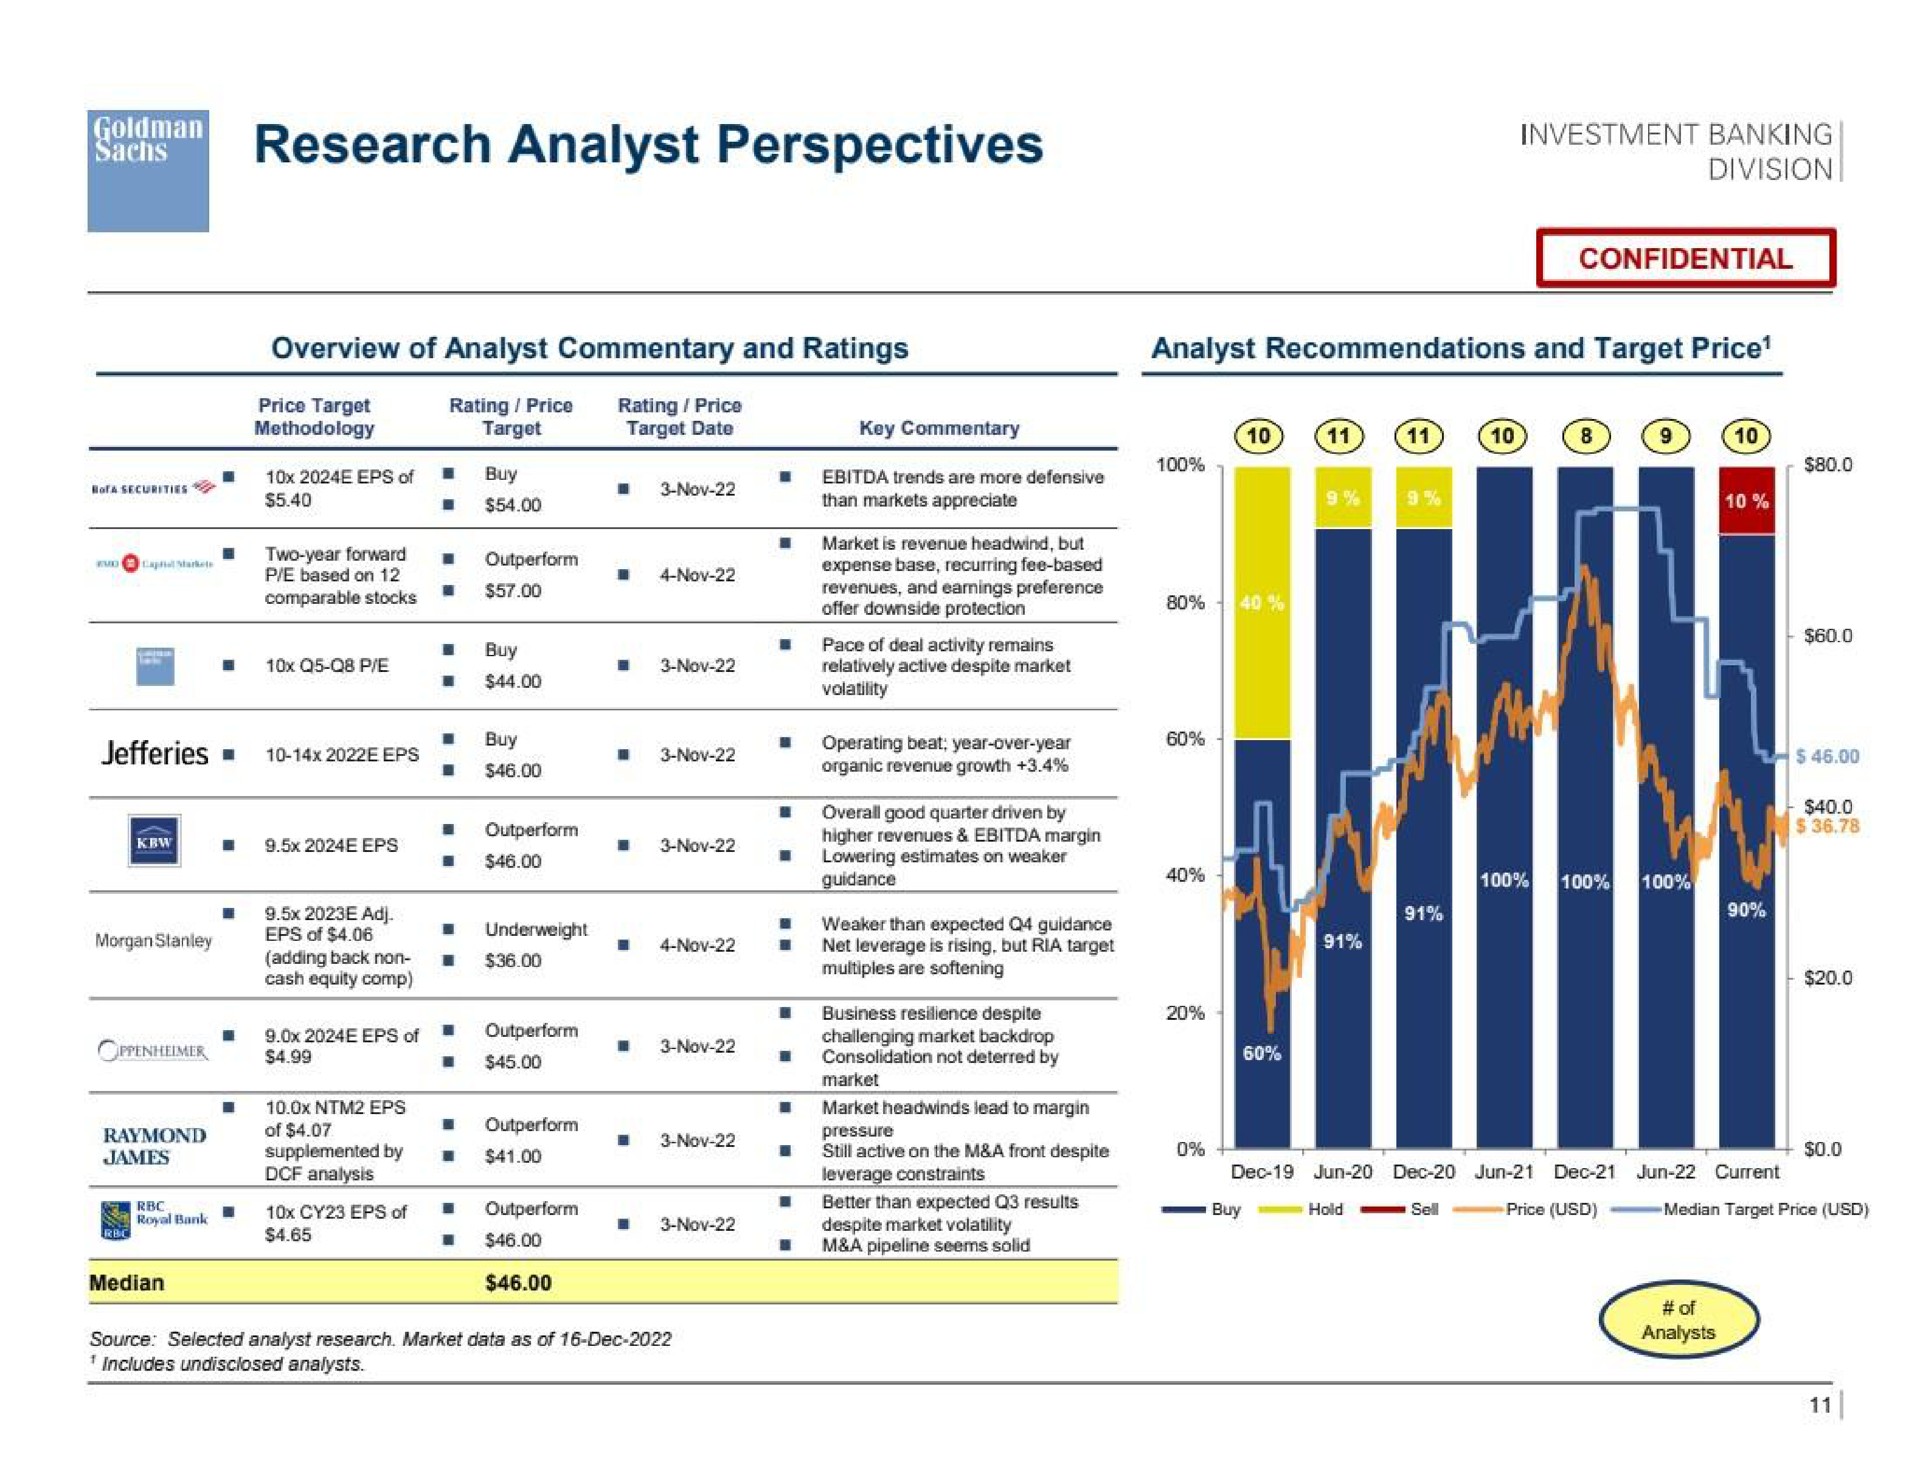 sal research analyst perspectives investment banking | Goldman Sachs